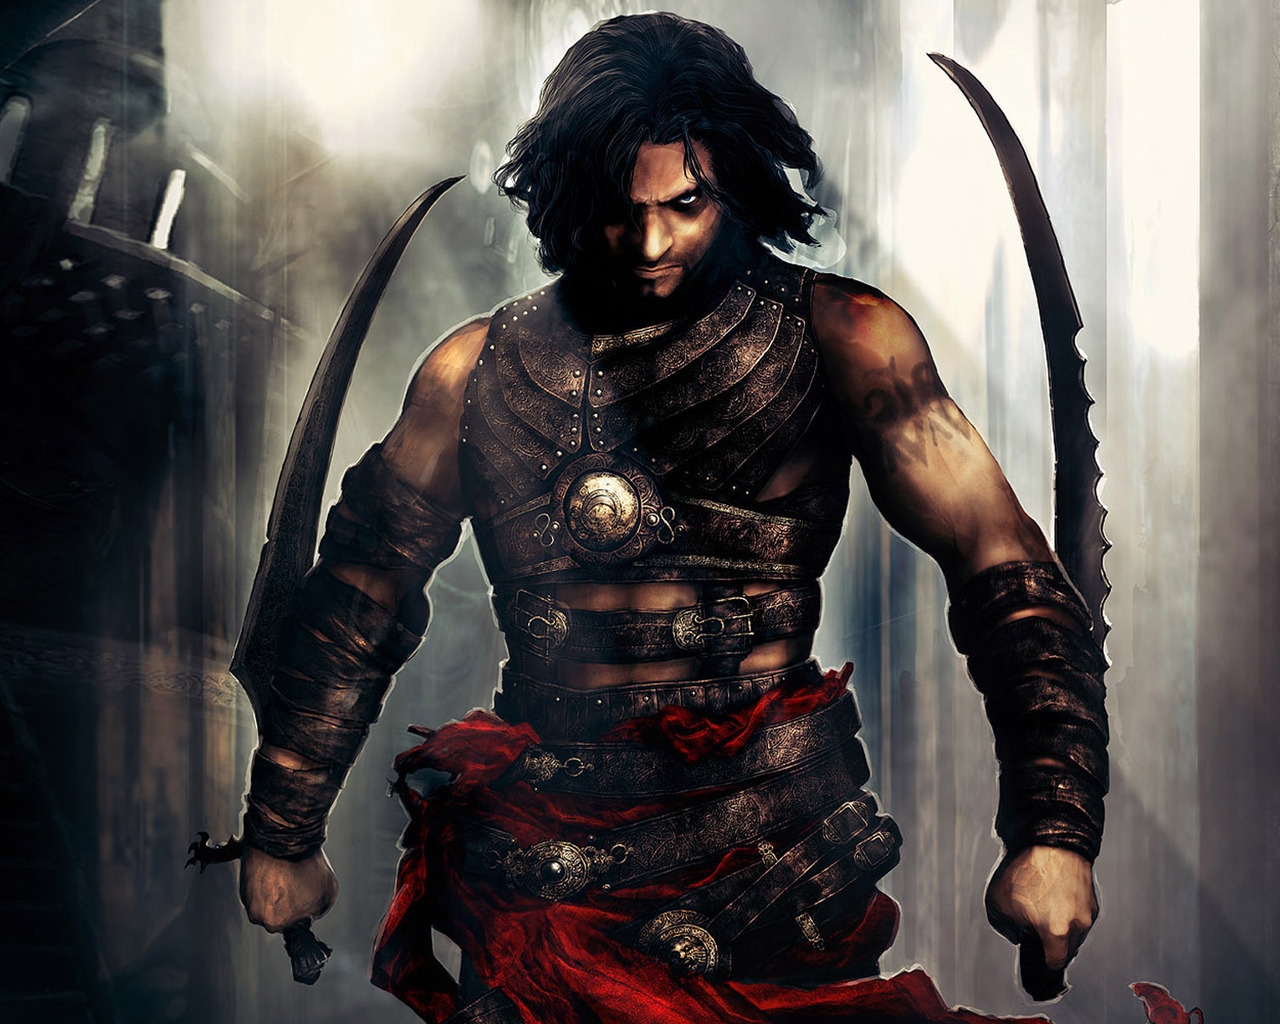 Prince of Persia Scene for 1280 x 1024 resolution